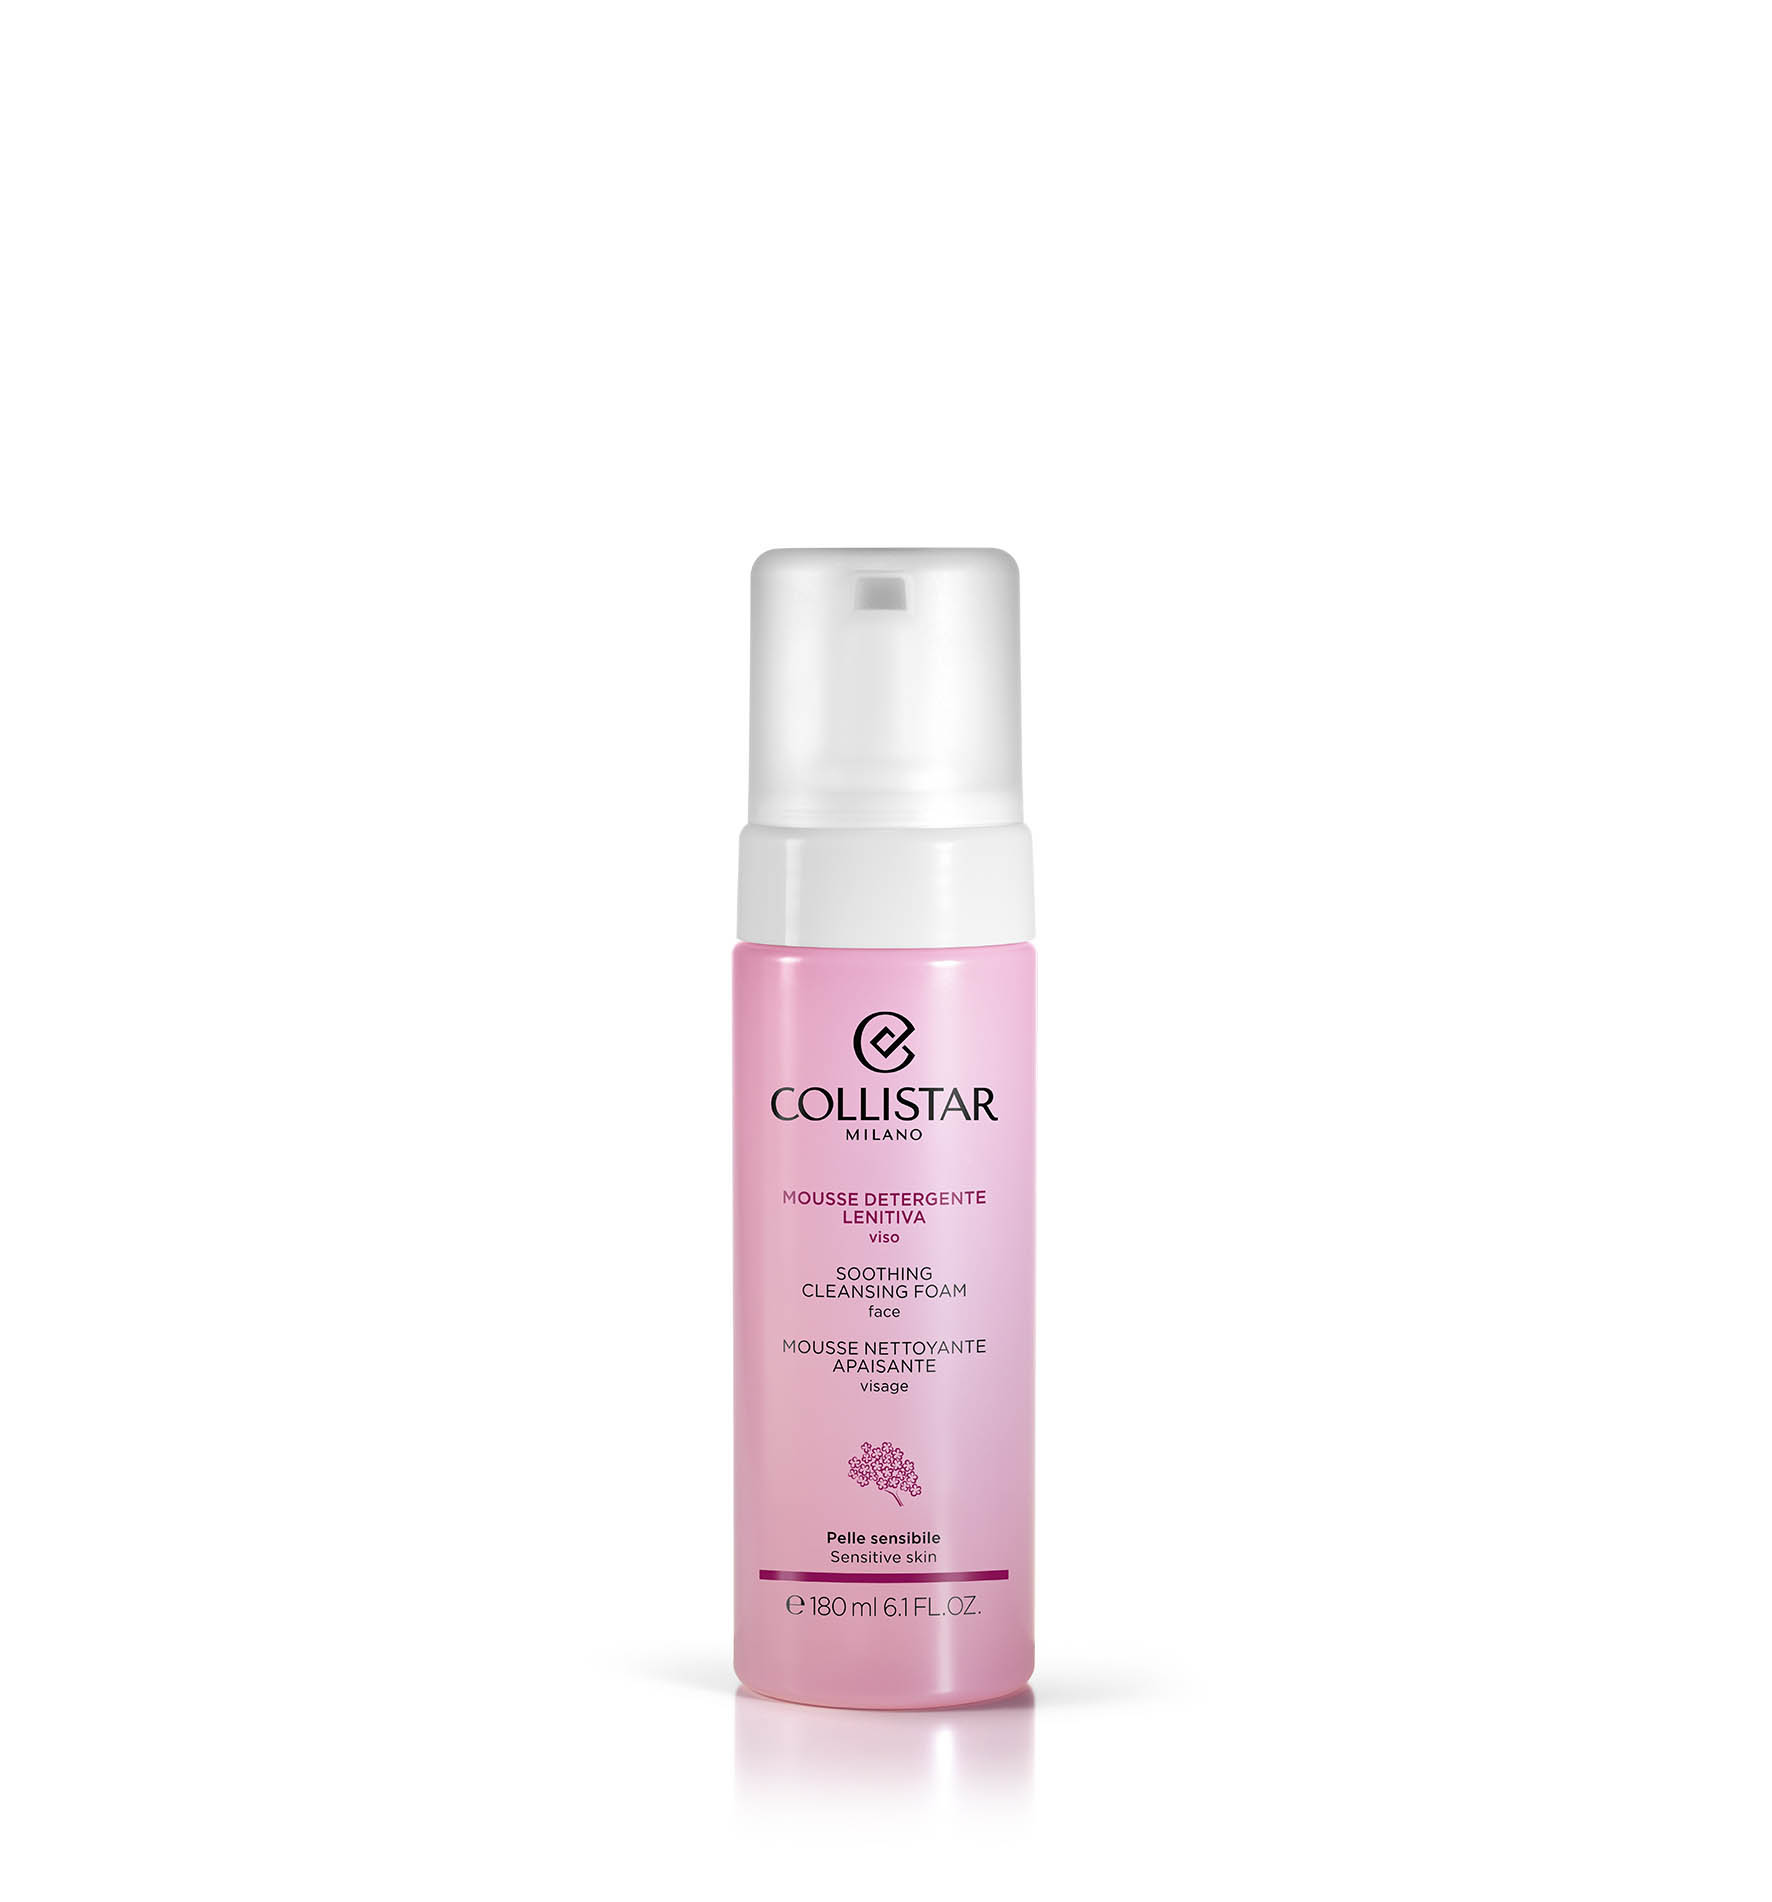 SOOTHING CLEANSING FOAM FACE - Cleansers | Collistar - Shop Online Ufficiale